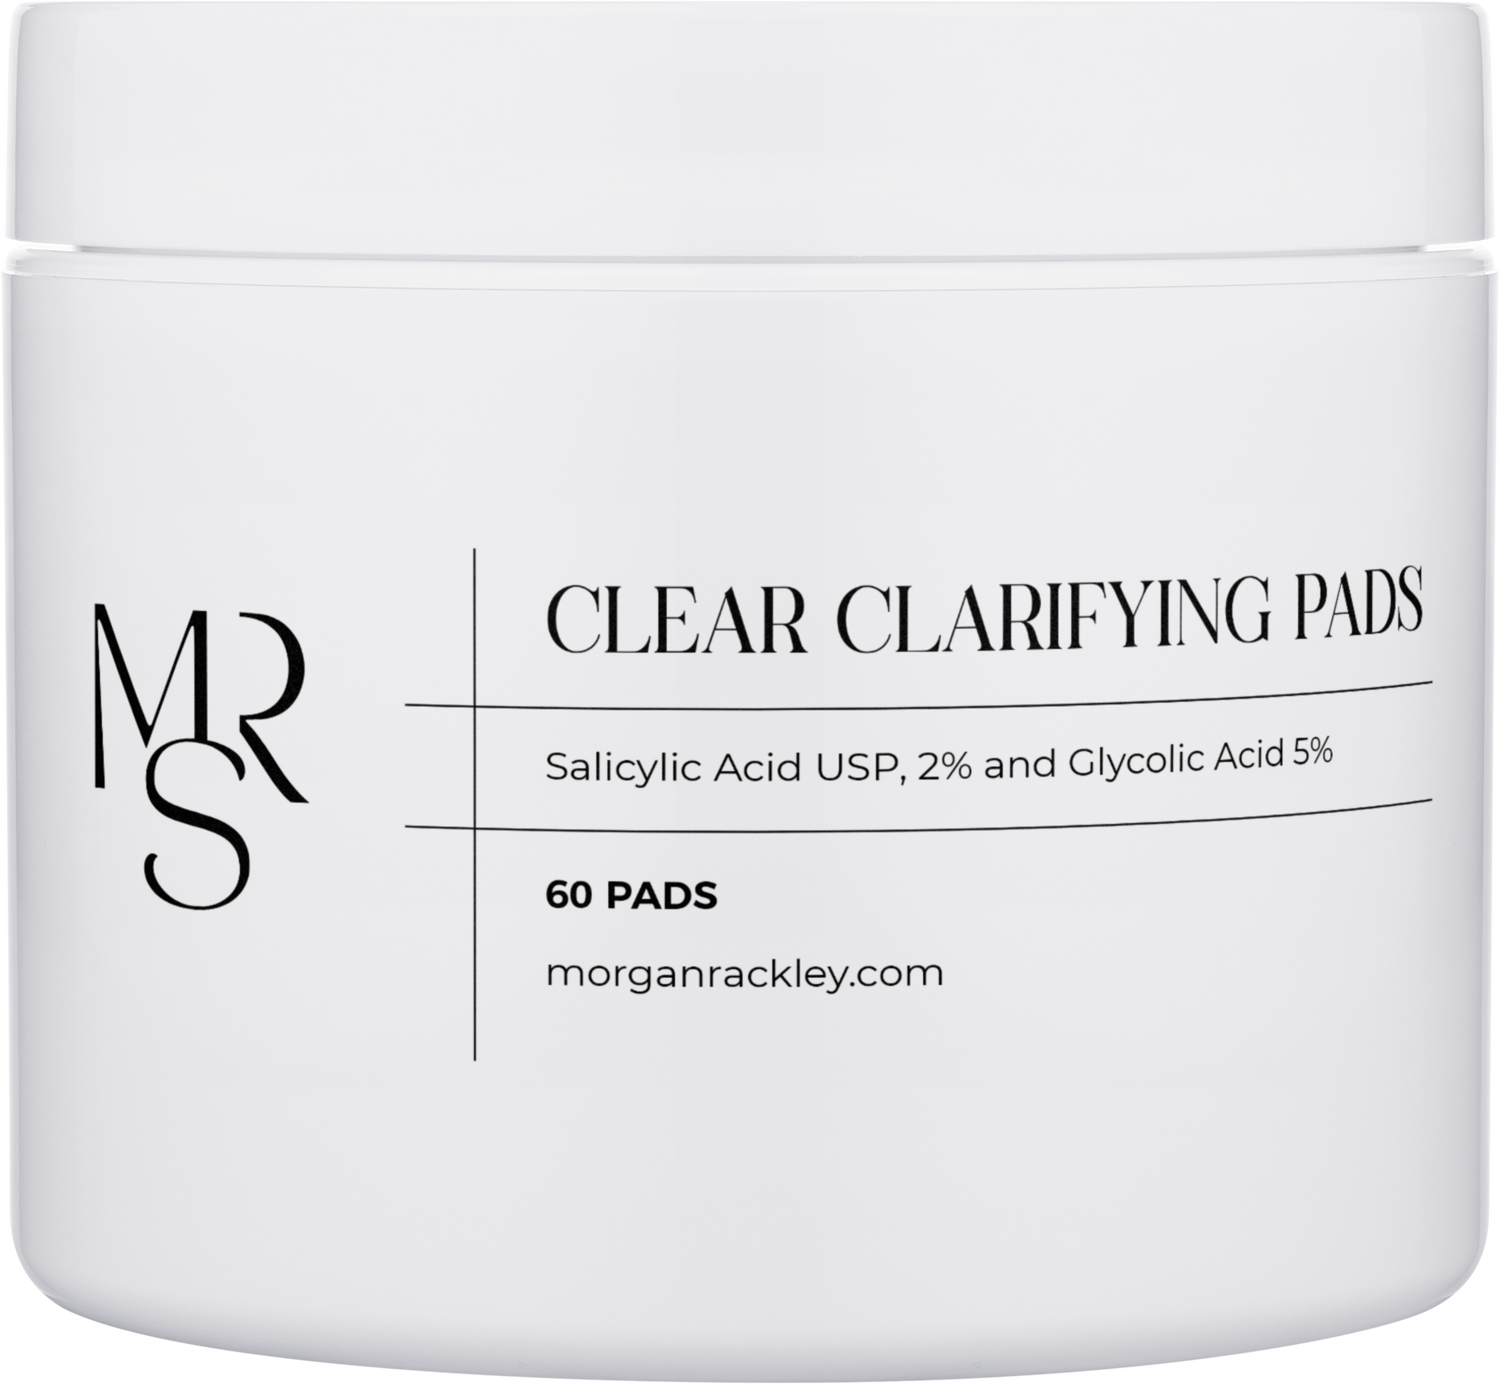 Clear Clarifying Pads